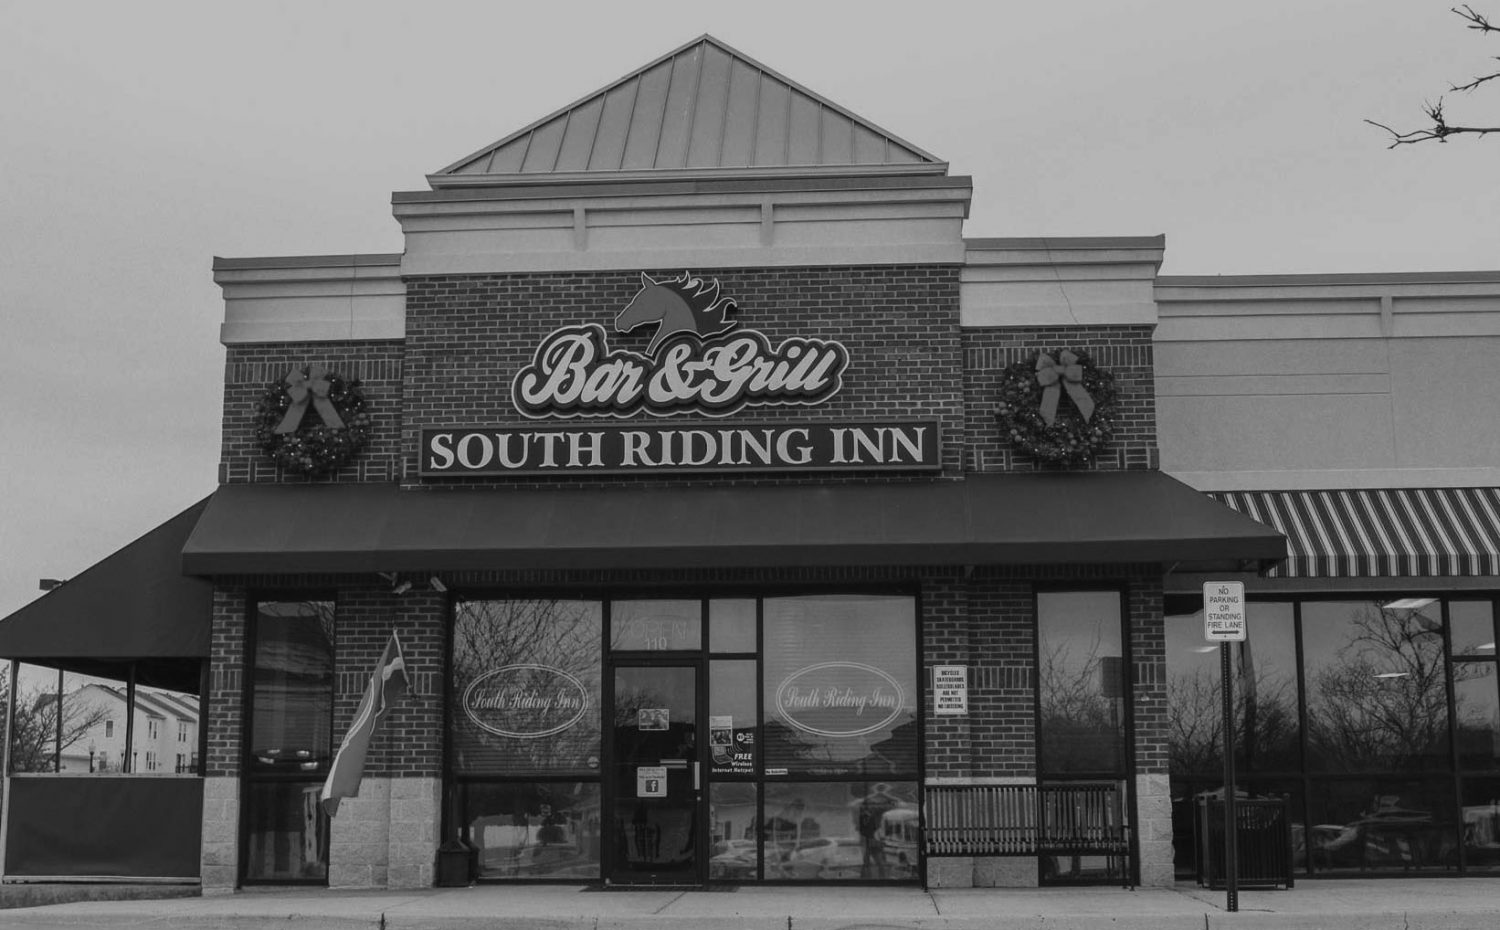 south riding inn bar and grill about